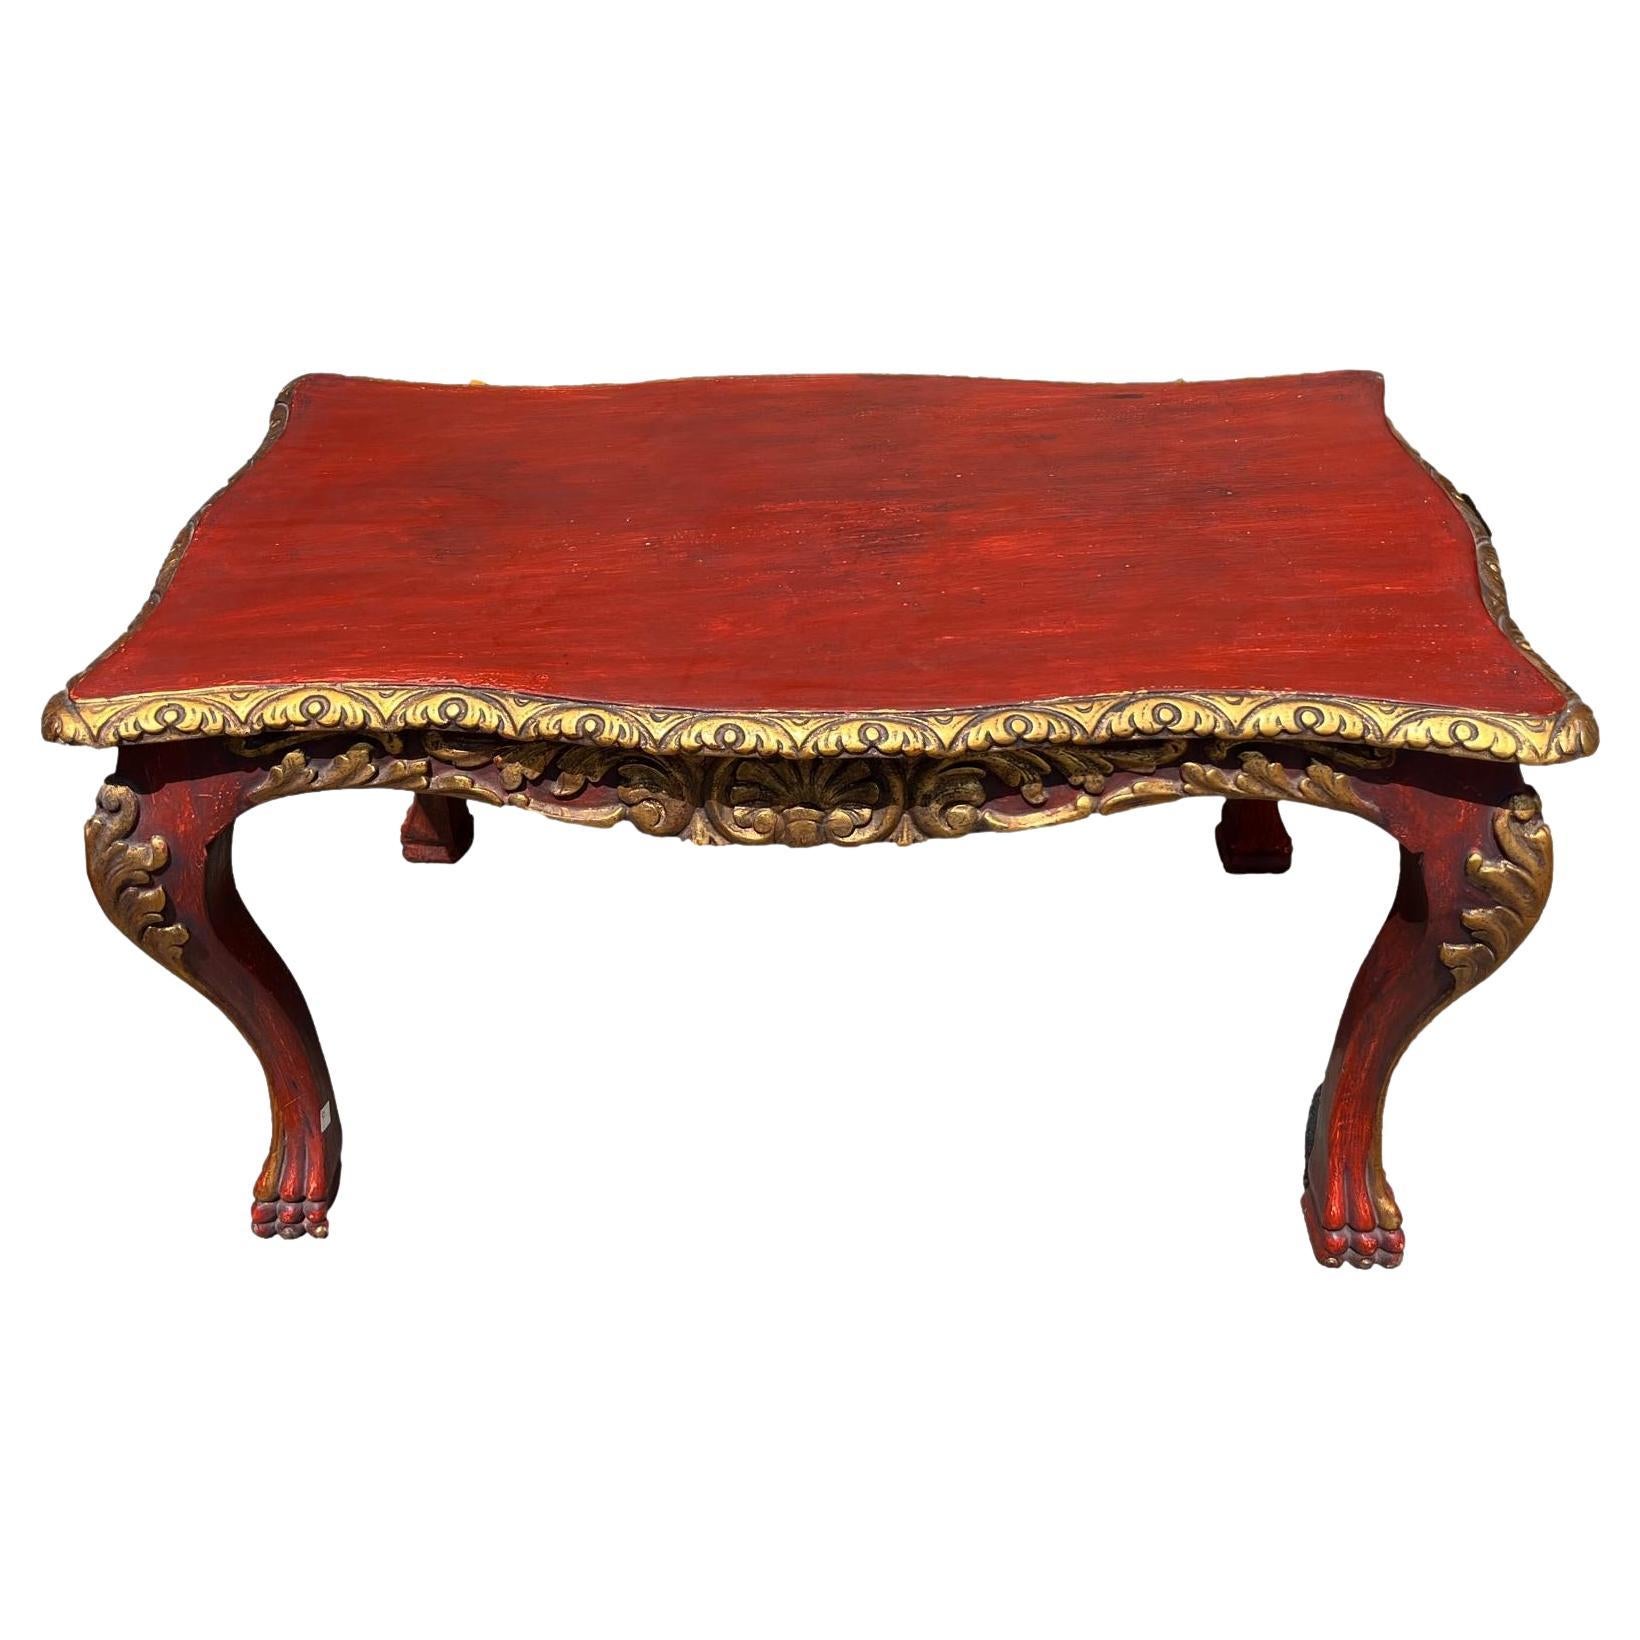 Painted and Gilt Venetian Table